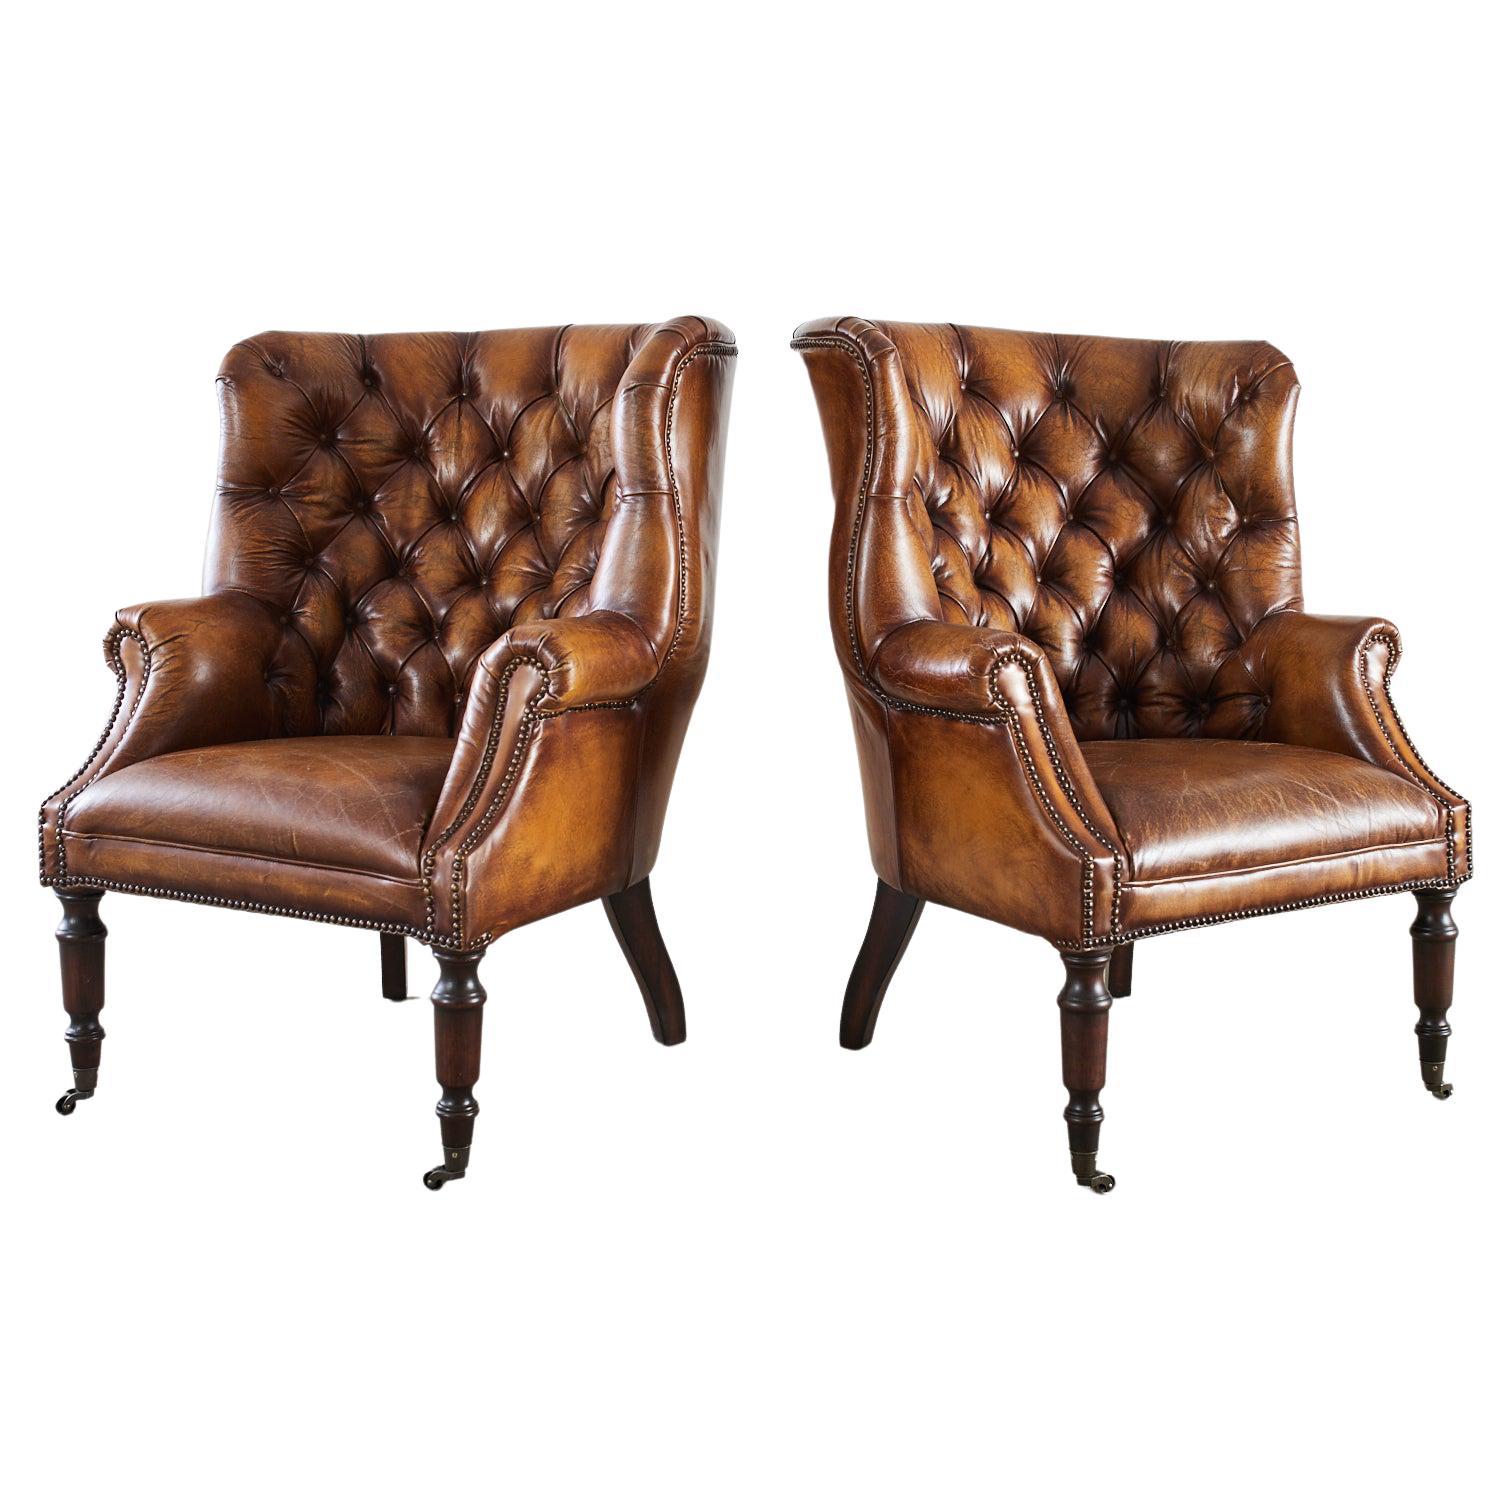 Pair of English Georgian Style Cigar Leather Wingback Chairs